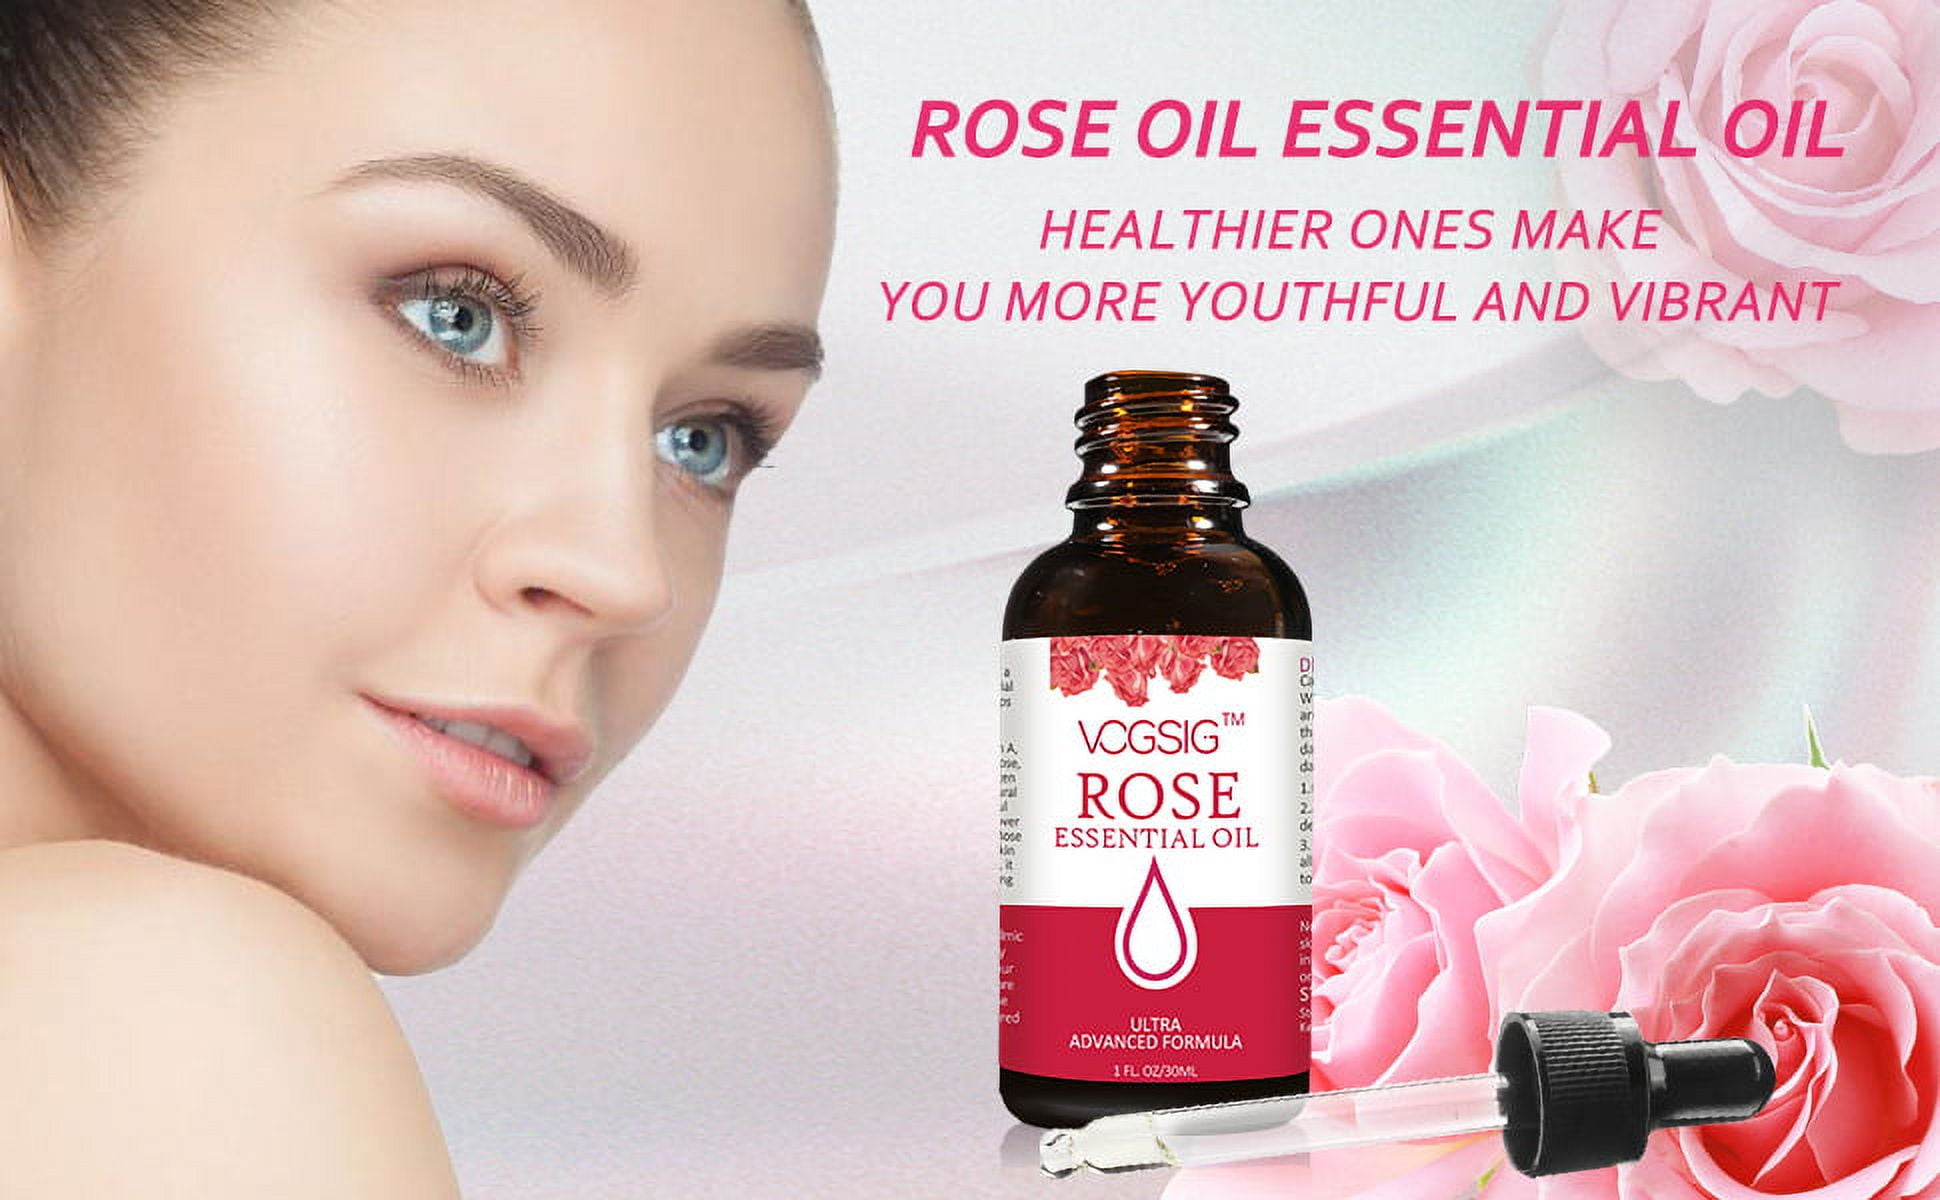 VOGSIG Rose Essential Oil 30ml - Aromatherapy, Skin Moisturizing,  Anti-Aging, Reduce Pigmentation, Quickly Absorbed